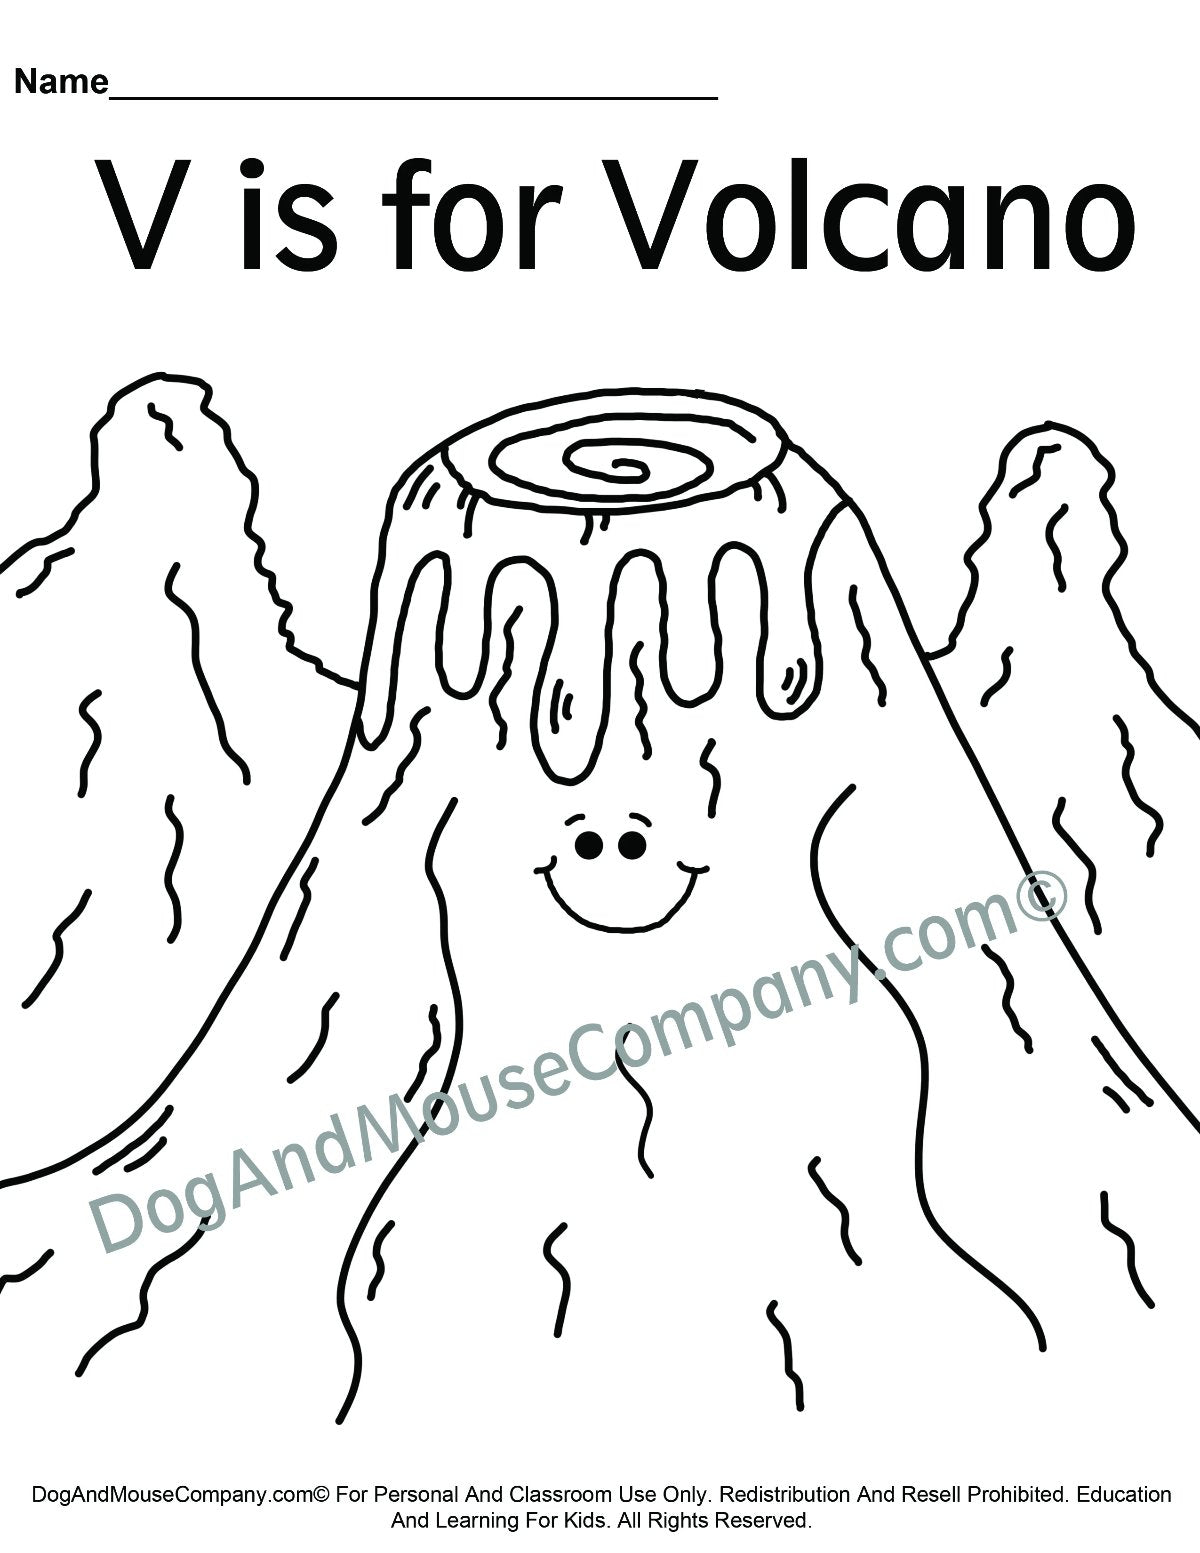 V Is For Volcano Coloring Page | Learn Your ABC's | Worksheet Printabl